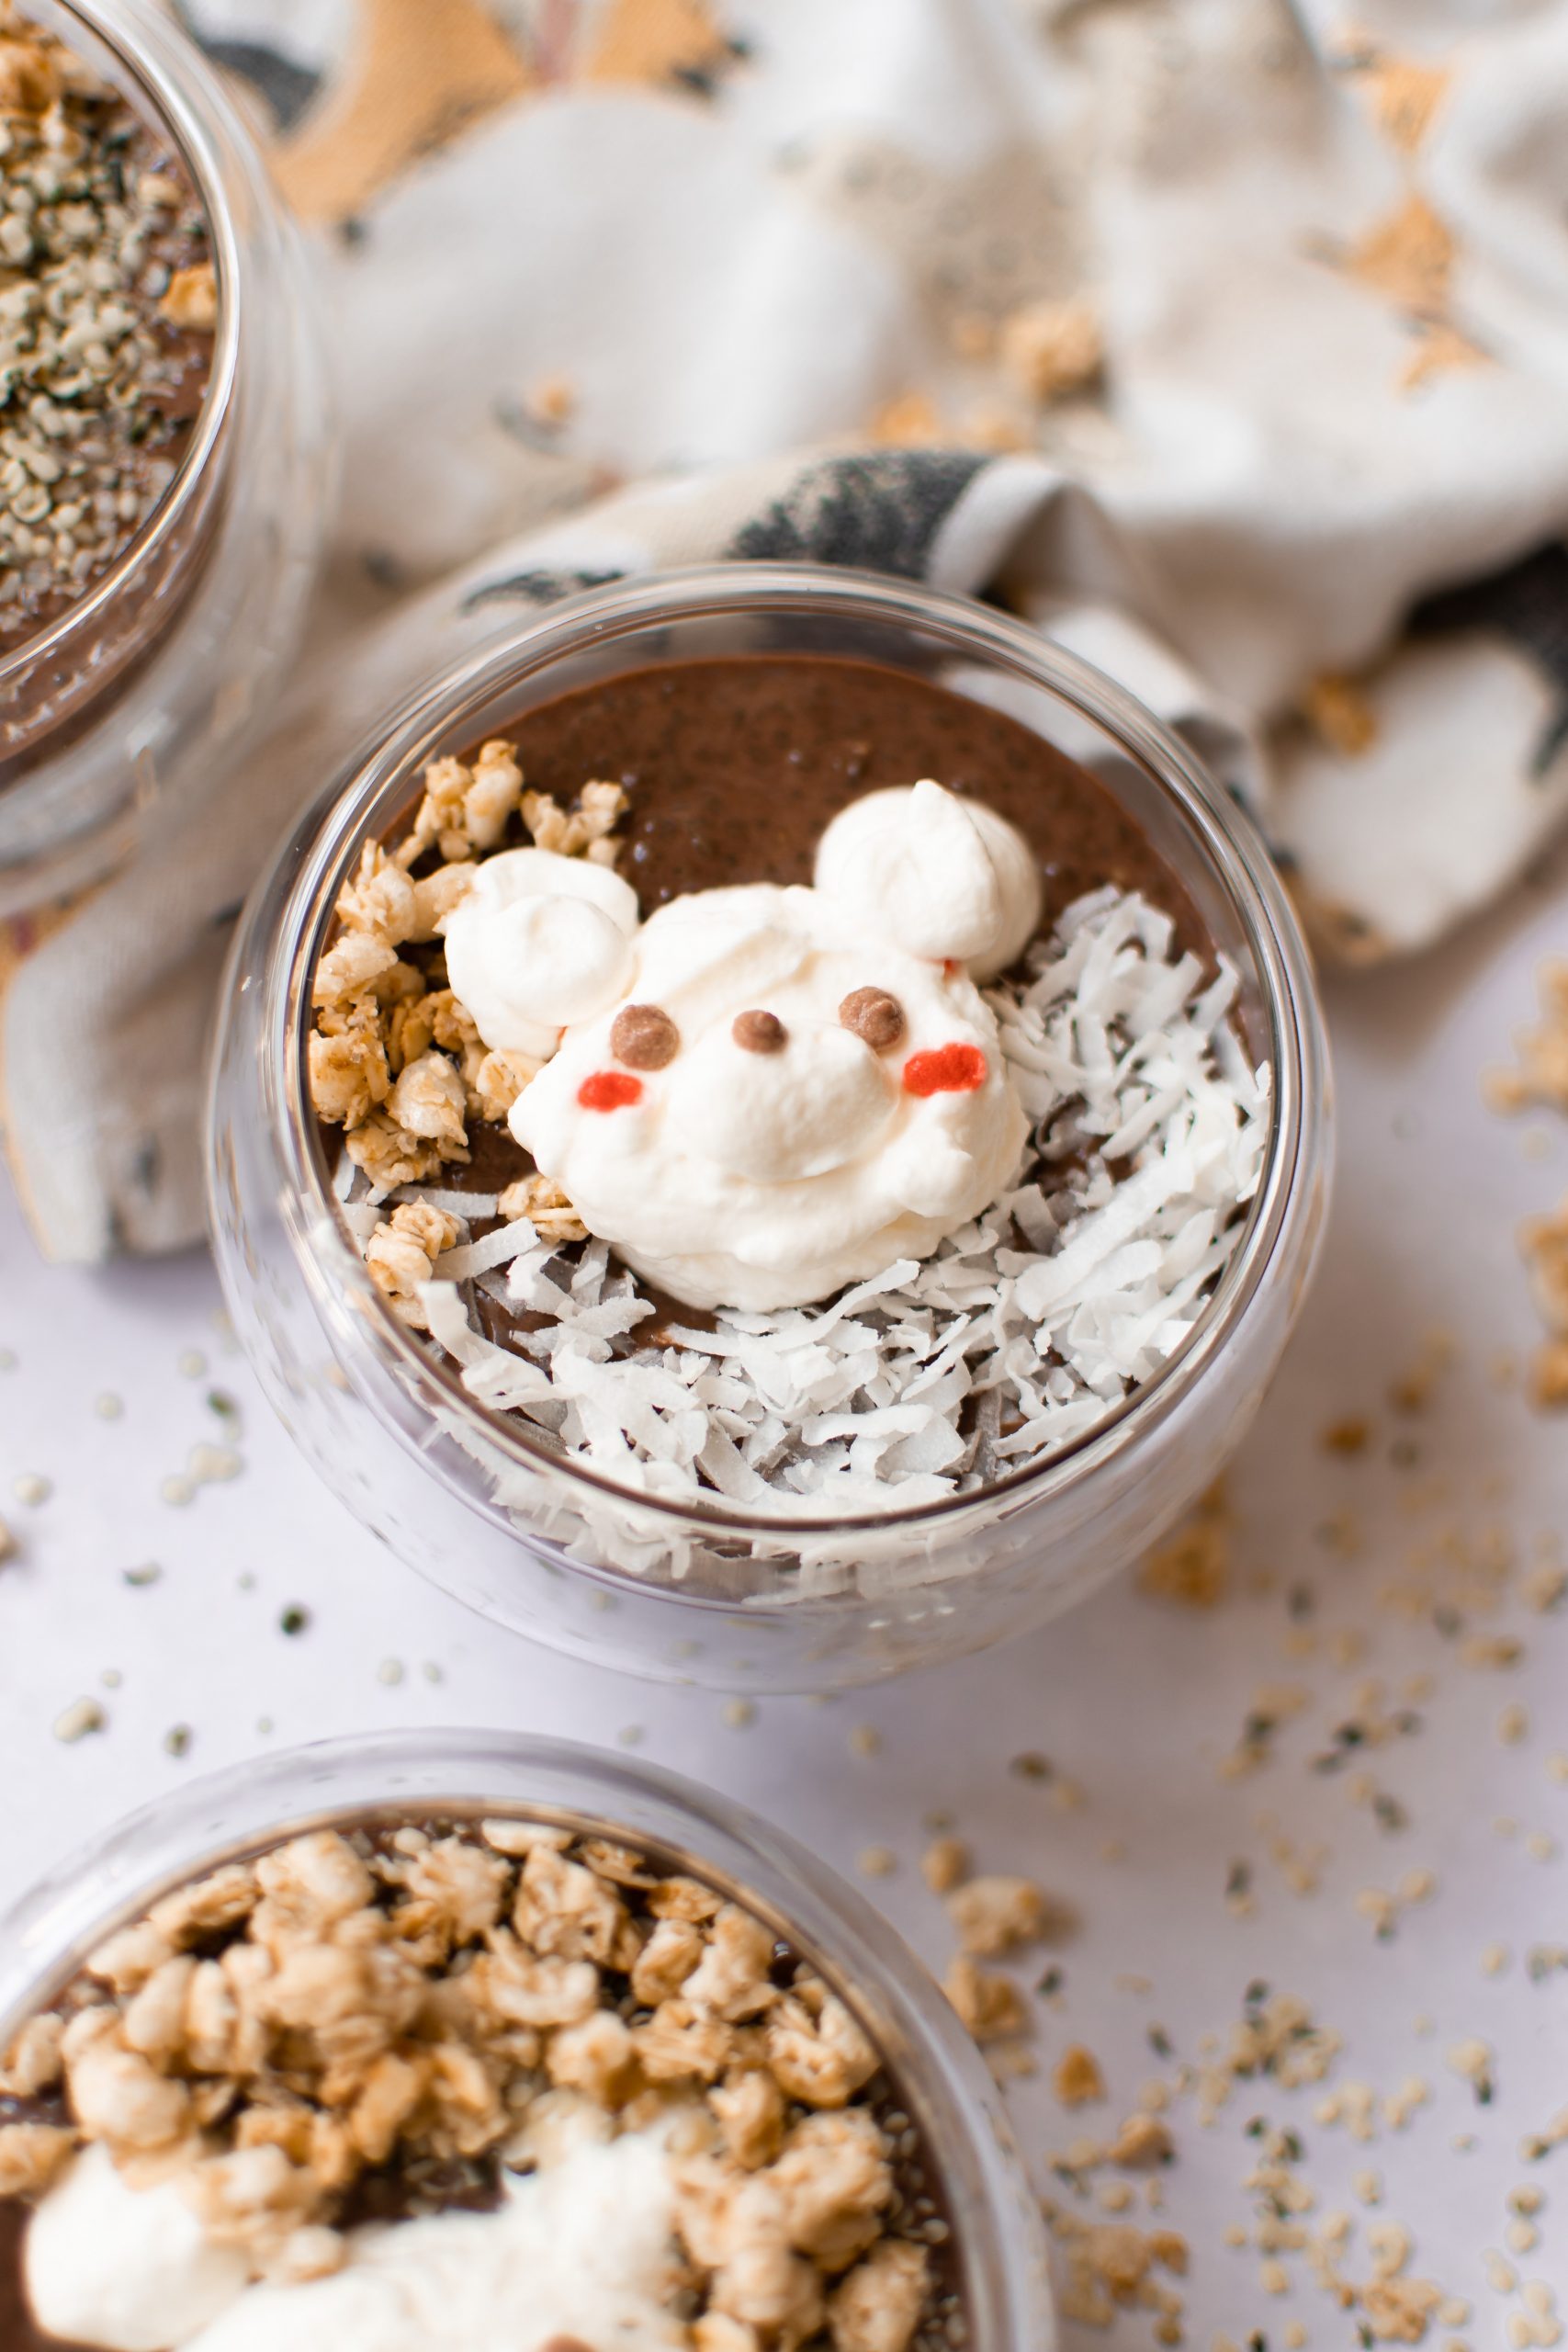 Bear Chocolate Chia Pudding (with Protein Powder!)